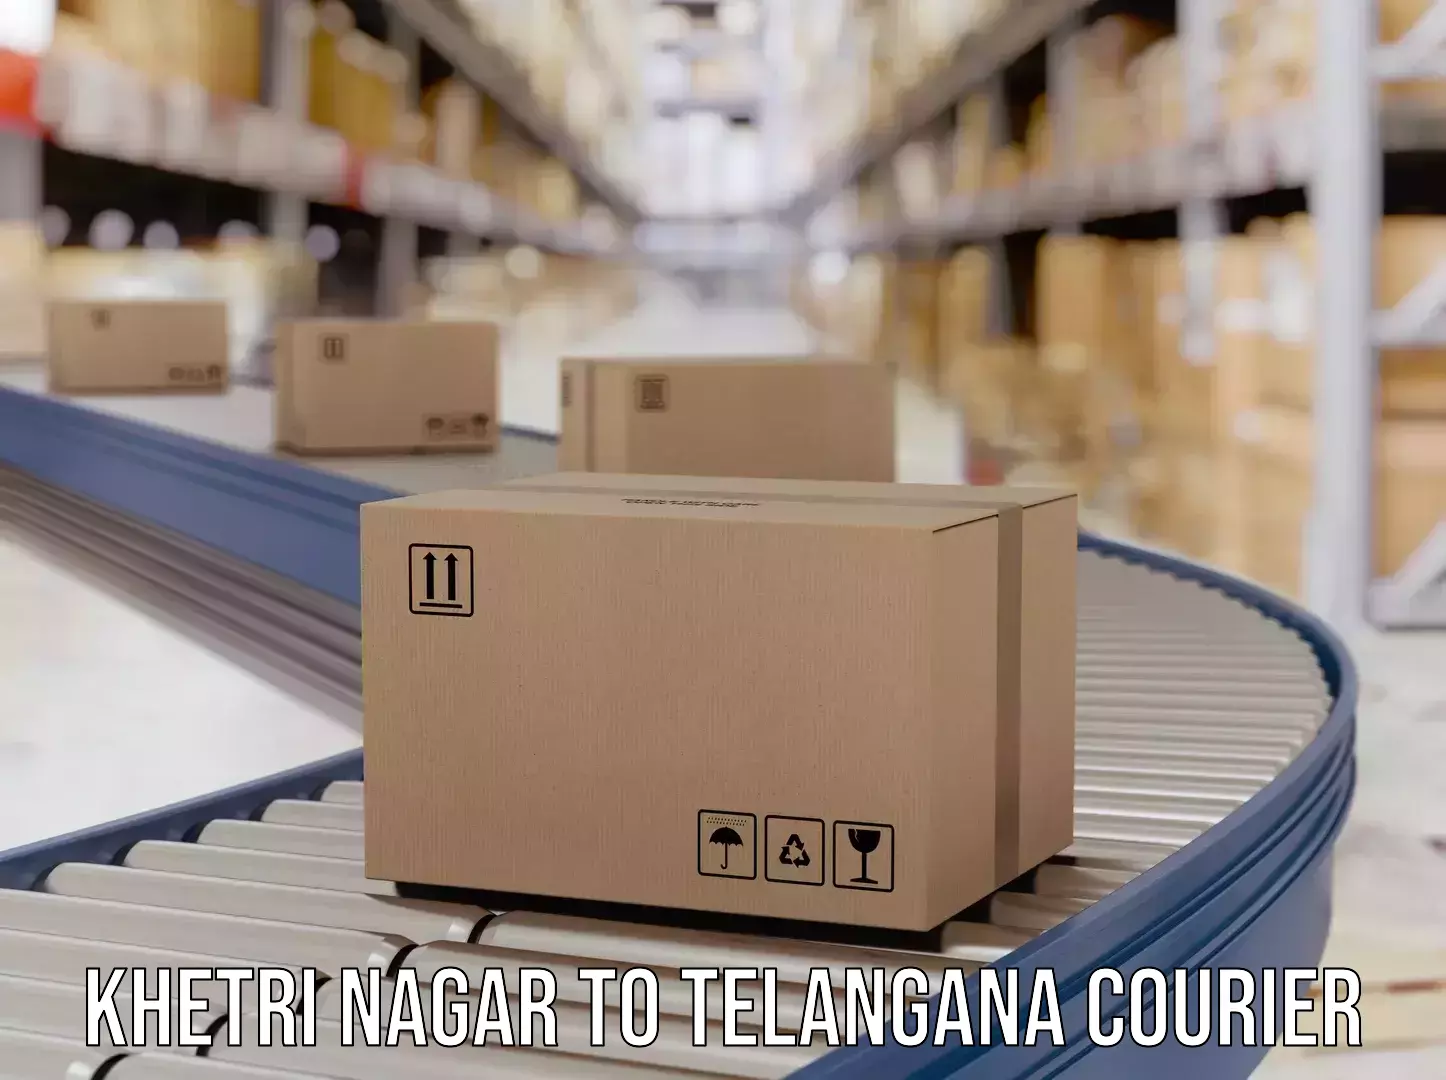 Automated shipping processes Khetri Nagar to Trimulgherry